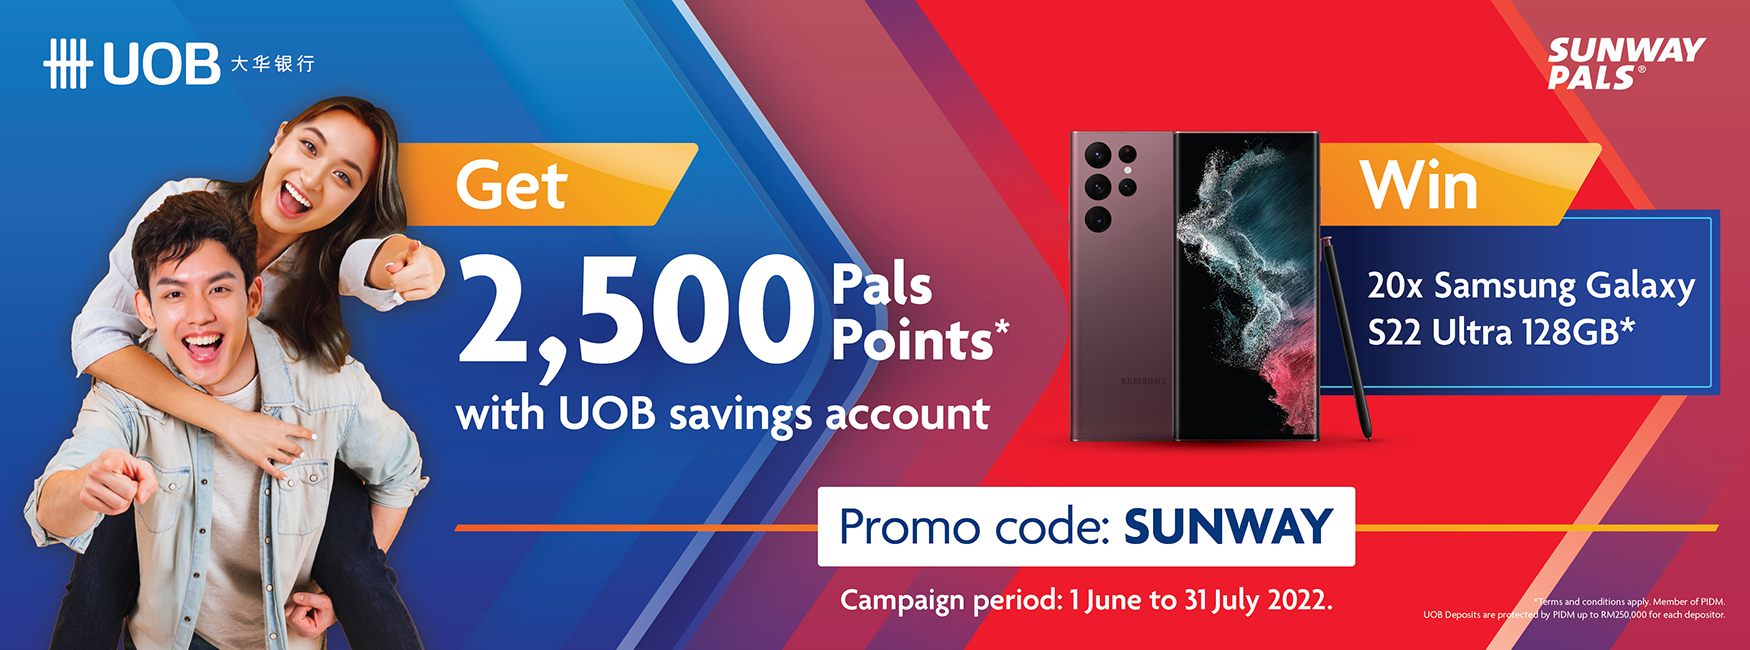 EARN 2,500 PALS POINTS - UOB MALAYSIA